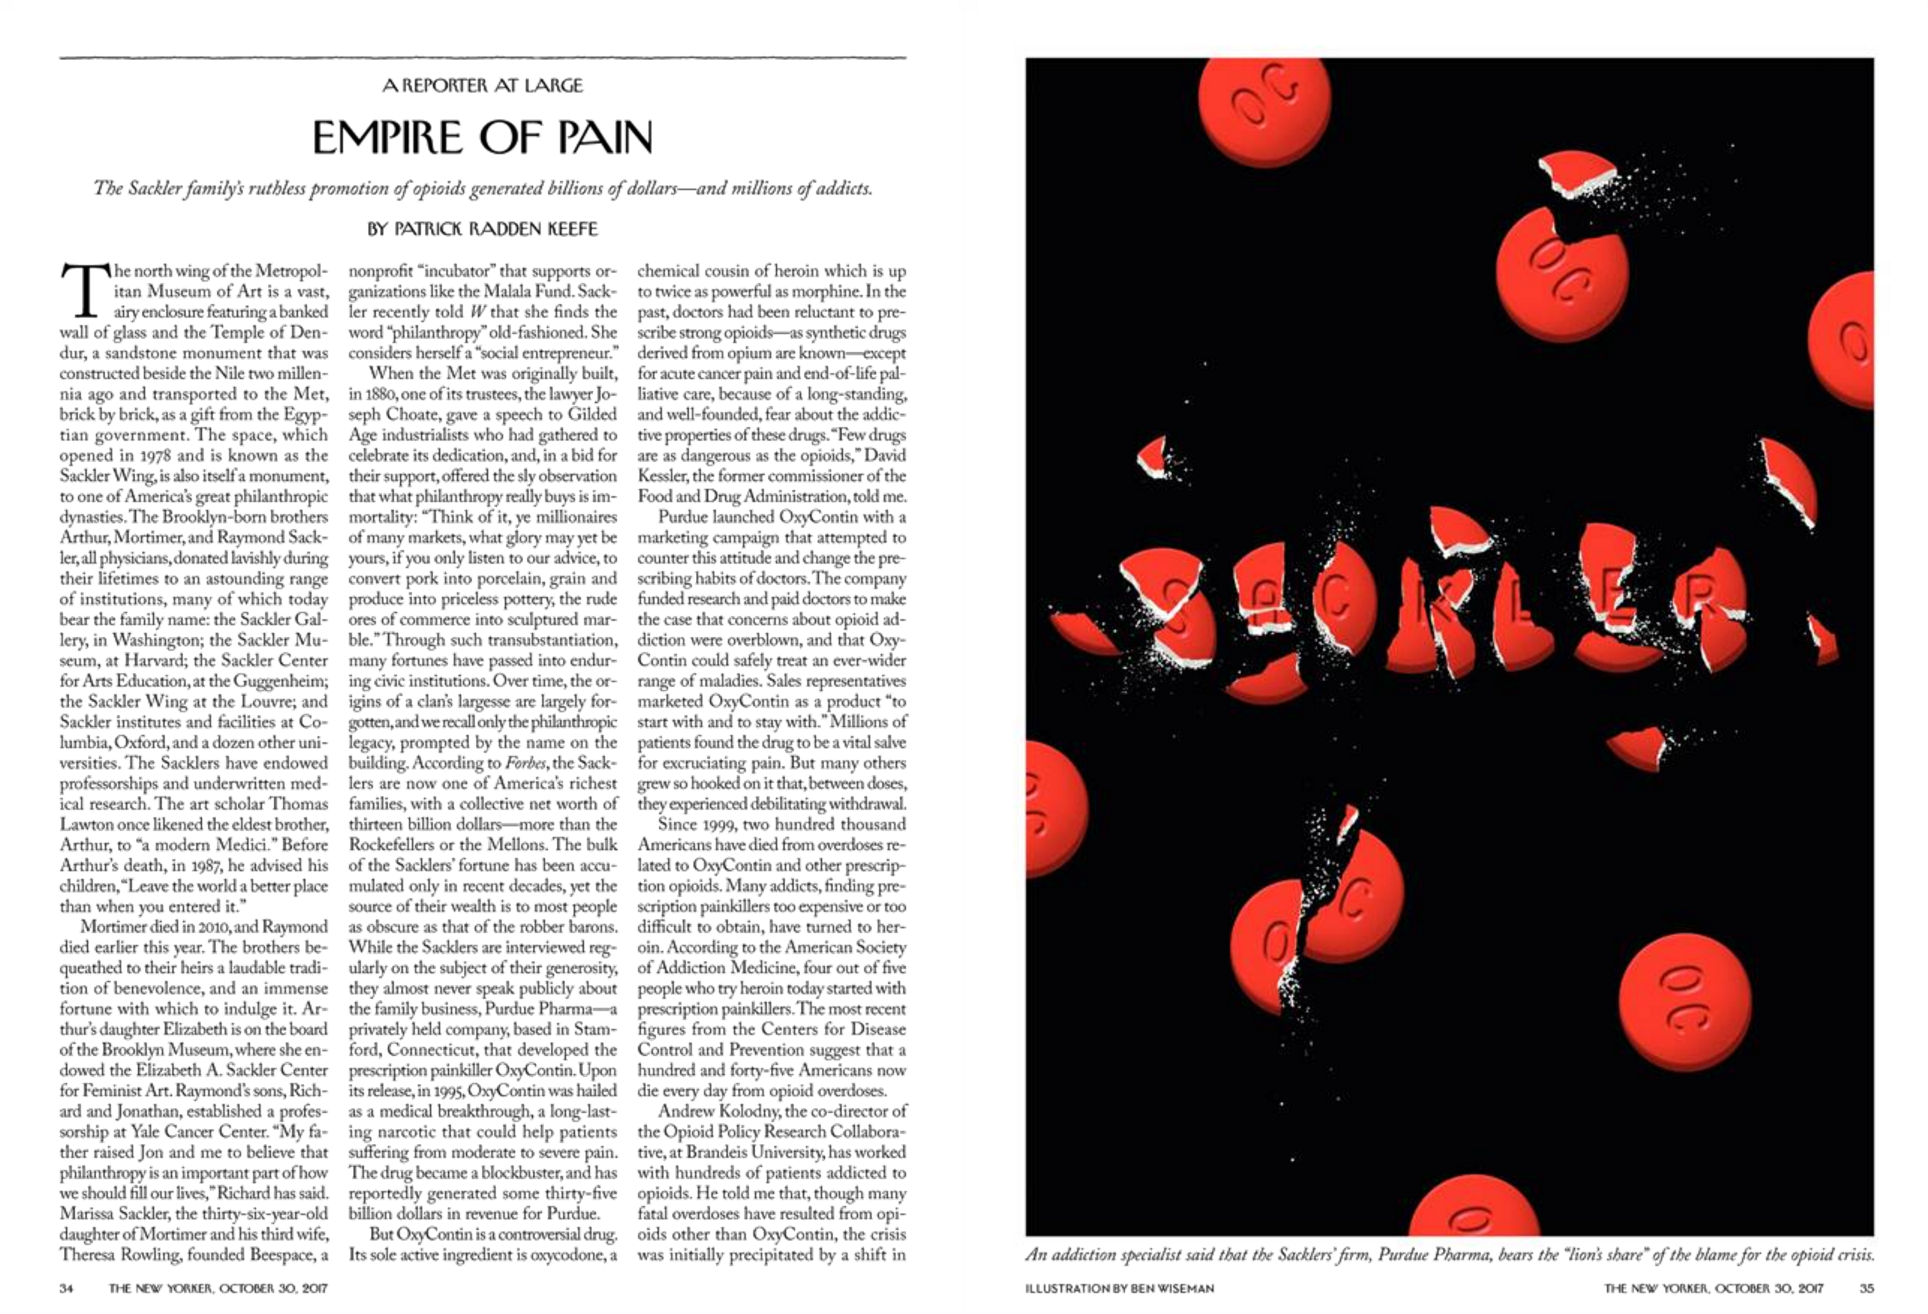 "Empire of Pain," The New Yorker, October 30, 2017